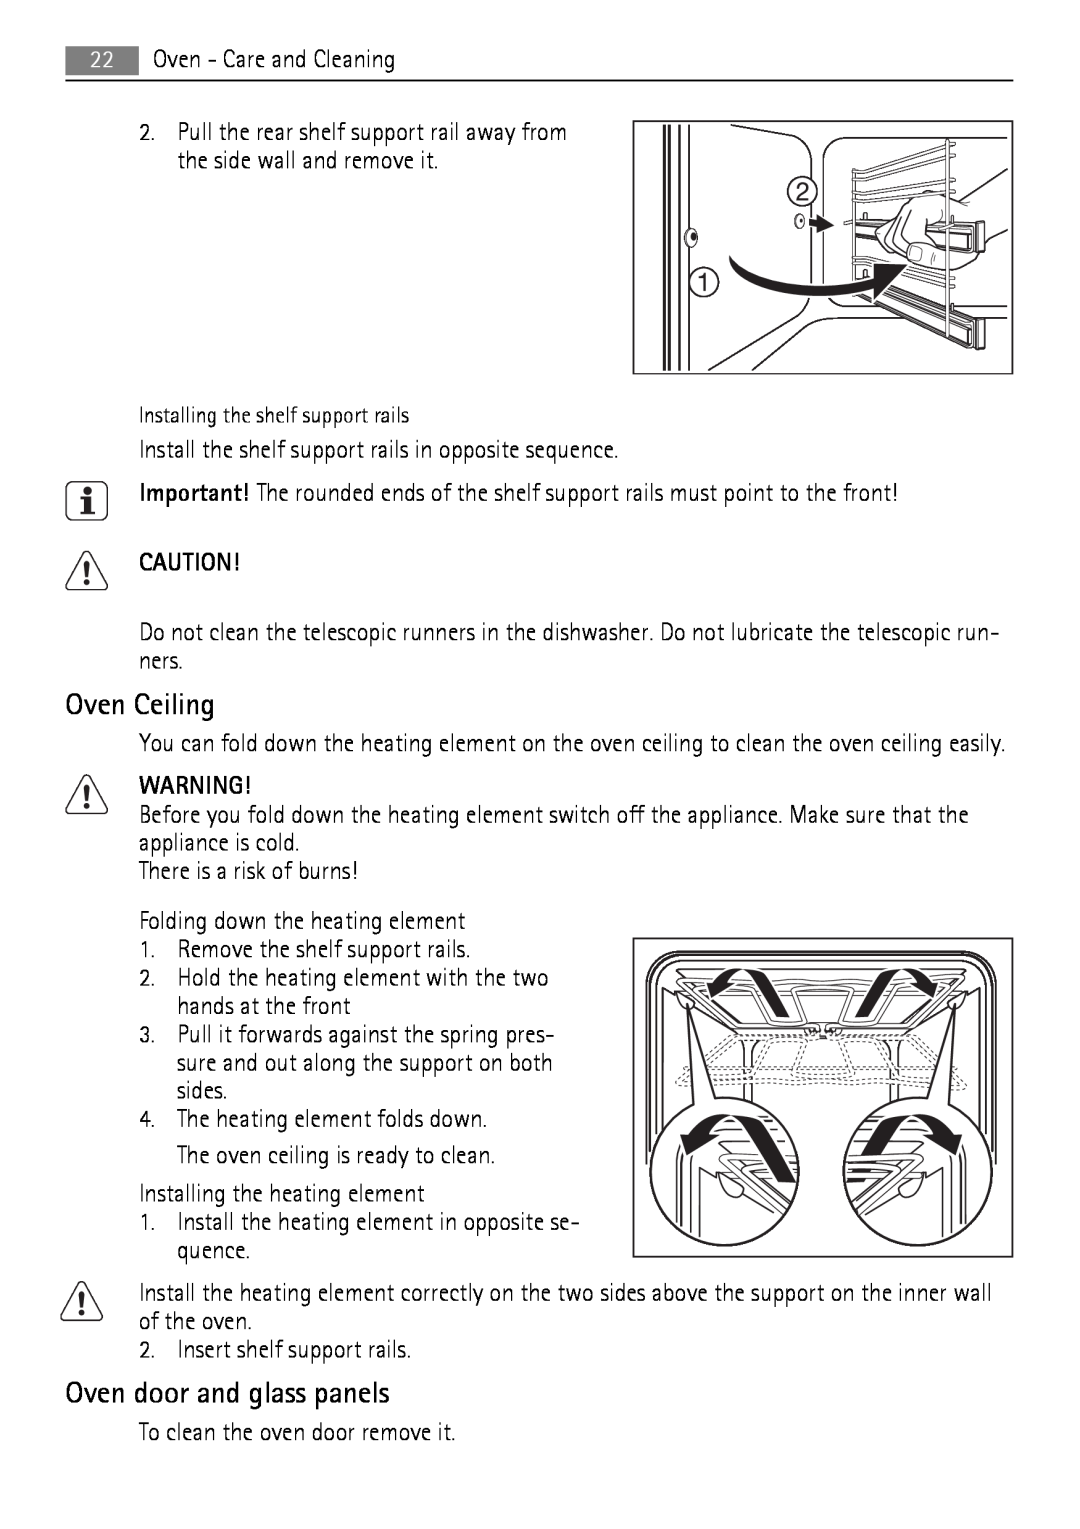 Electrolux 40036VI-WN user manual Oven Ceiling, Oven door and glass panels 